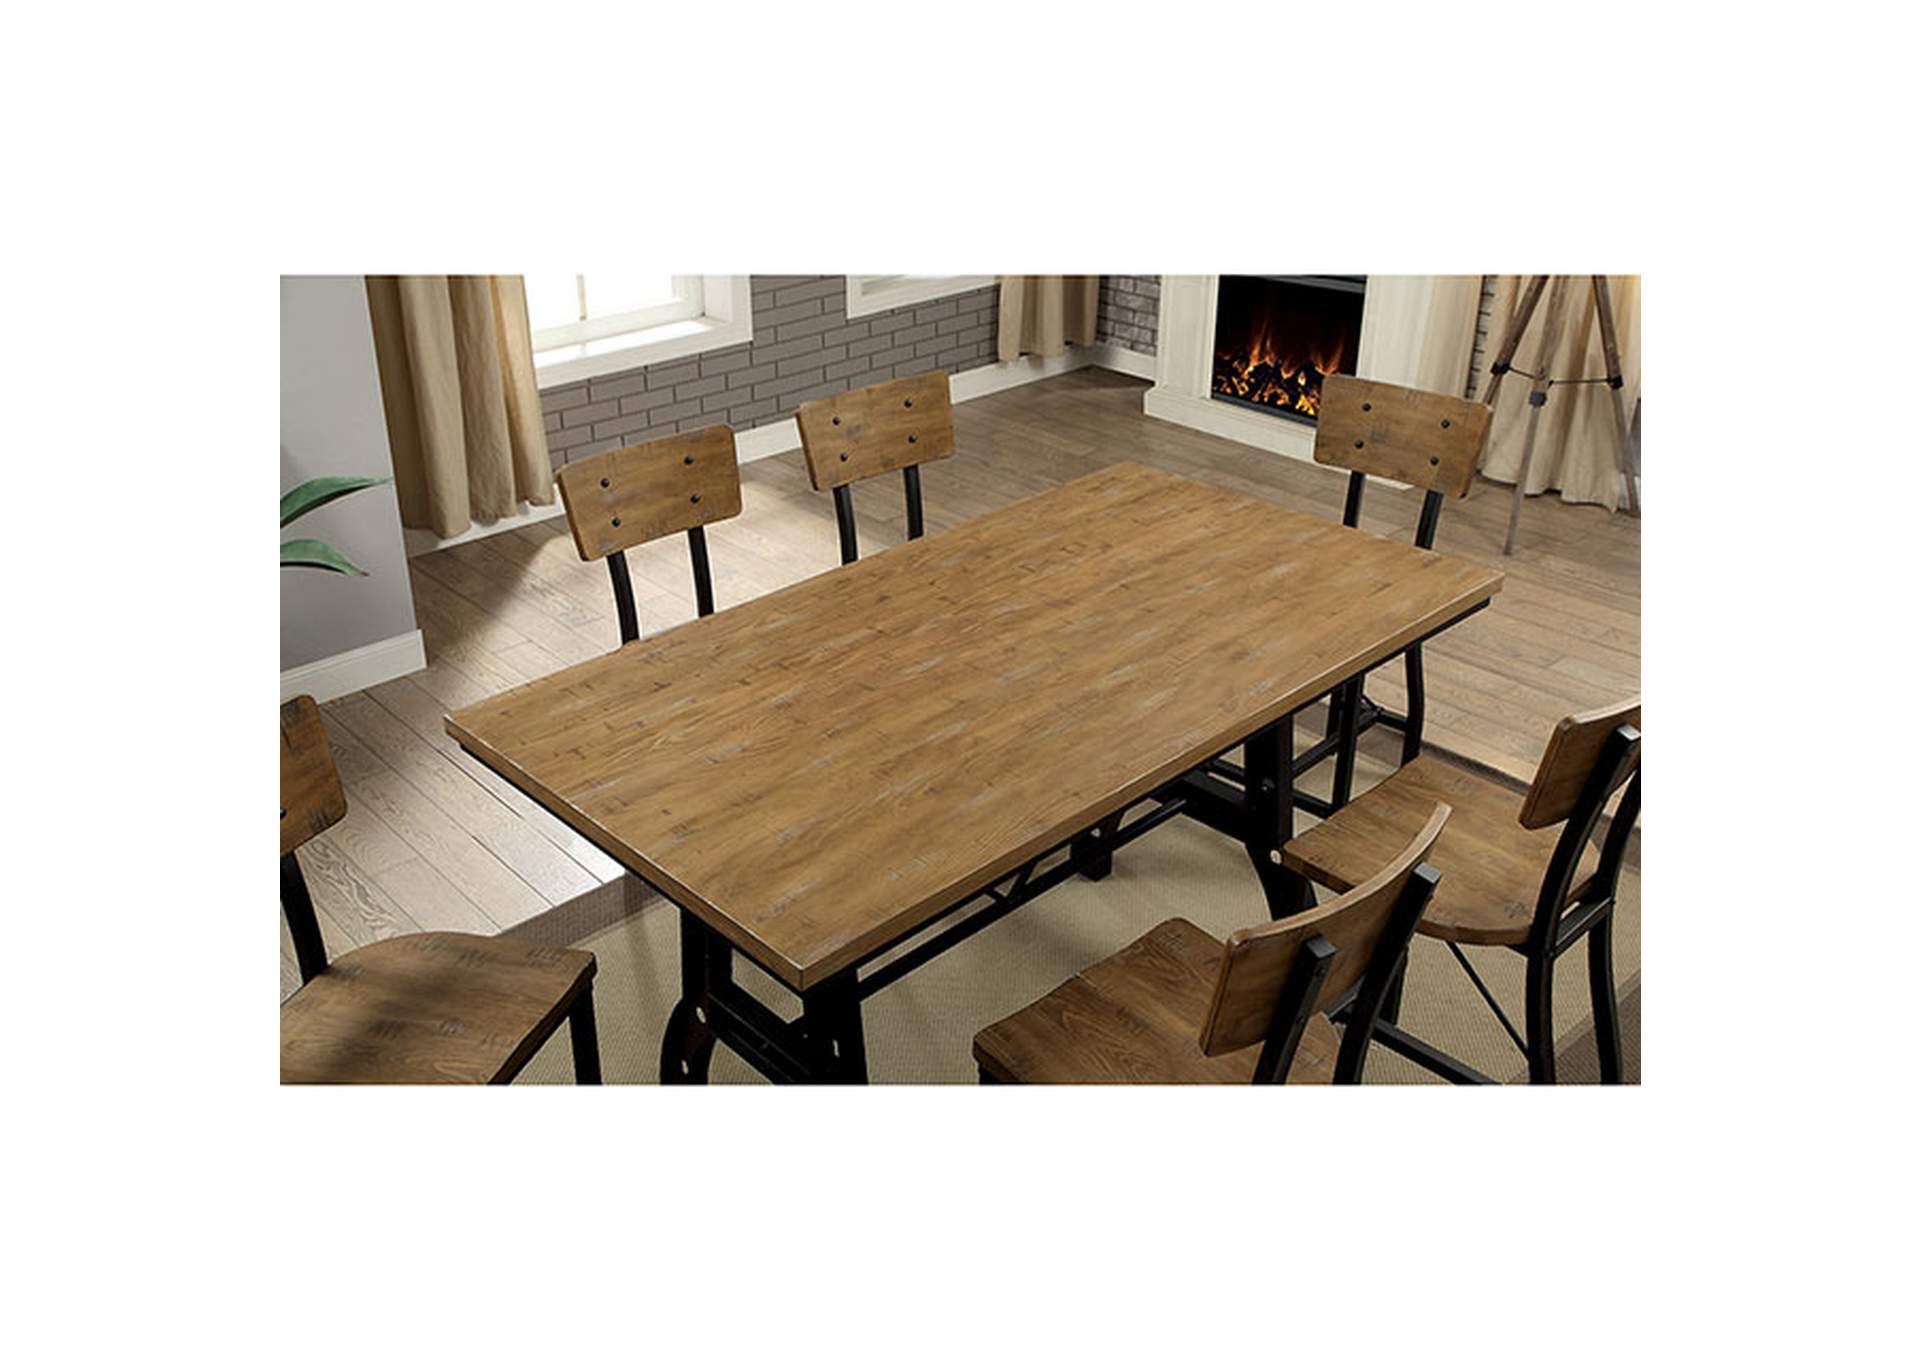 Kirstin Counter Height Table,Furniture of America